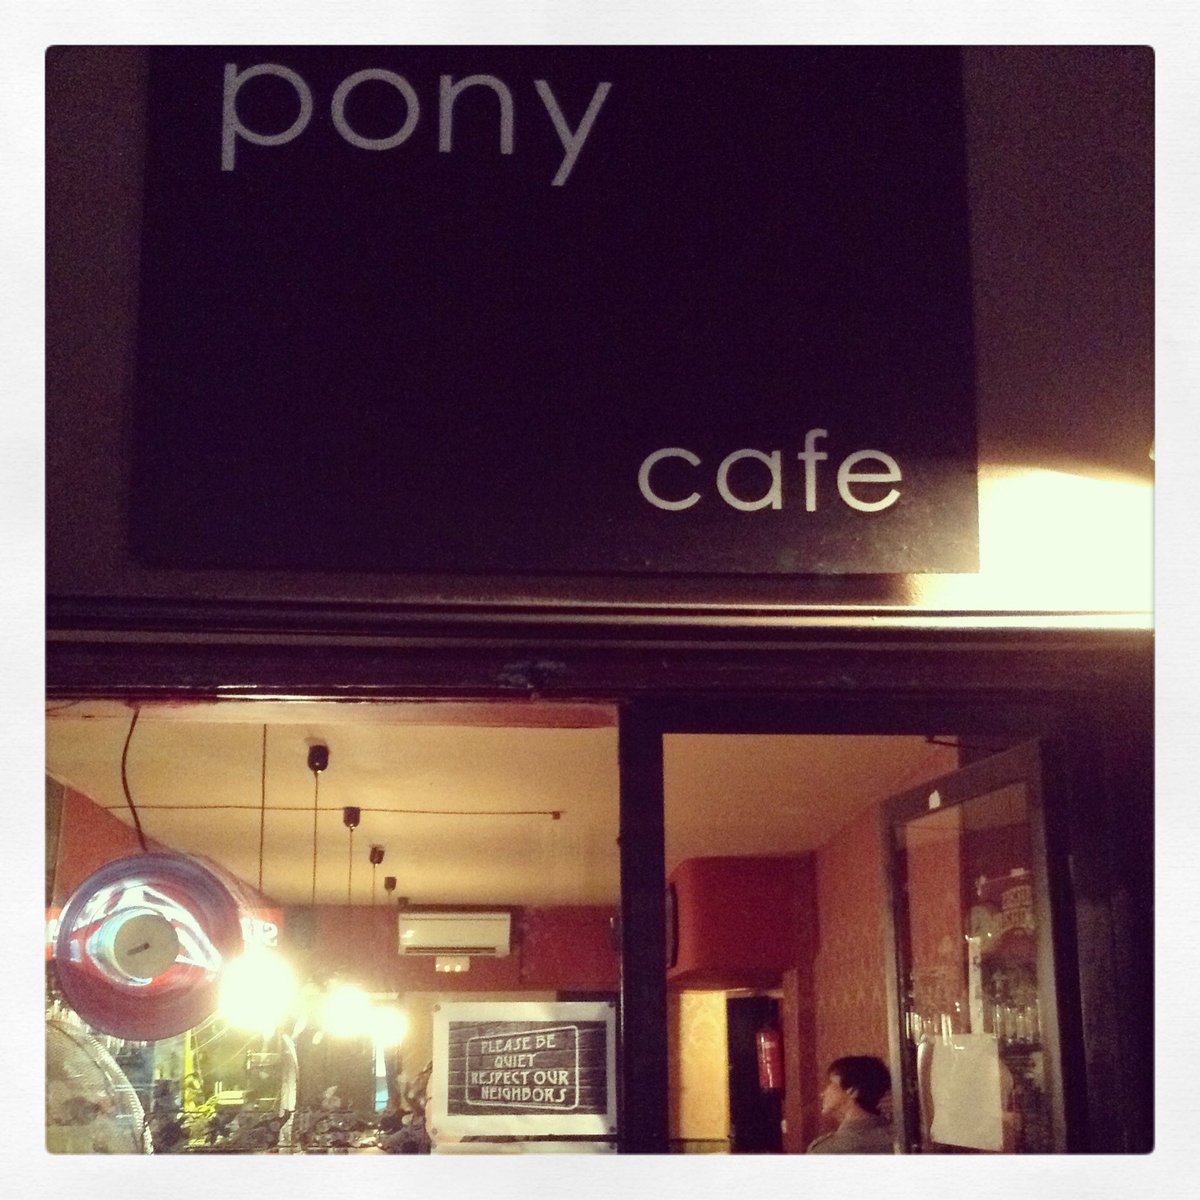 Pubs I Miss#5 Pony Cafe, BarcelonaCentral, but just off the beaten track - Pony Cafe is a neighbourhood bar with a hip makeover. Unbearably cool locals mix with international residents in an atmosphere that somehow feels totally chill and entirely electric. A gem in Born.